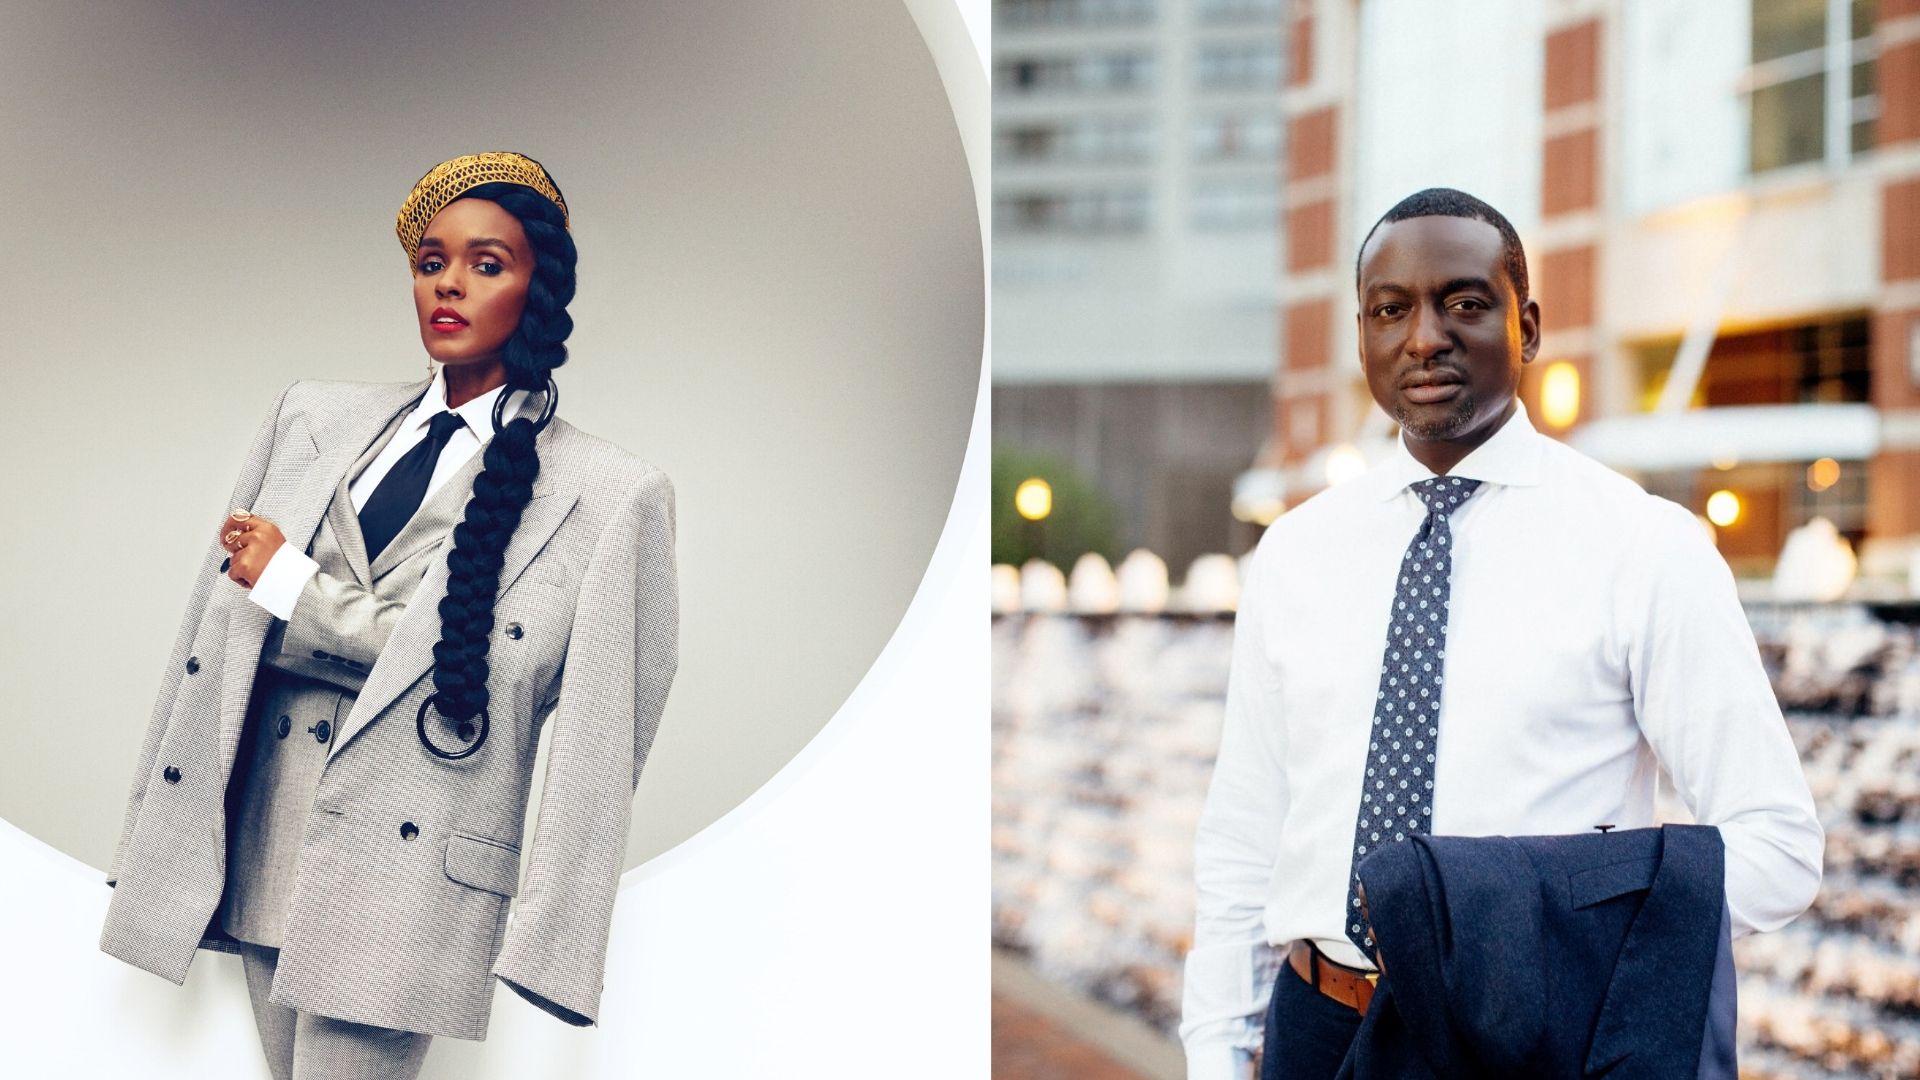 Janelle Monáe, a Grammy-nominated singer-songwriter, performer, producer and actor, and Yusef Salaam, one of the Exonerated Five, formally known as the Central Park Five, will speak at Vanderbilt University on Jan. 19 as the featured panelists for the 2020 Martin Luther King Jr. Commemorative Series keynote event in Langford Auditorium.